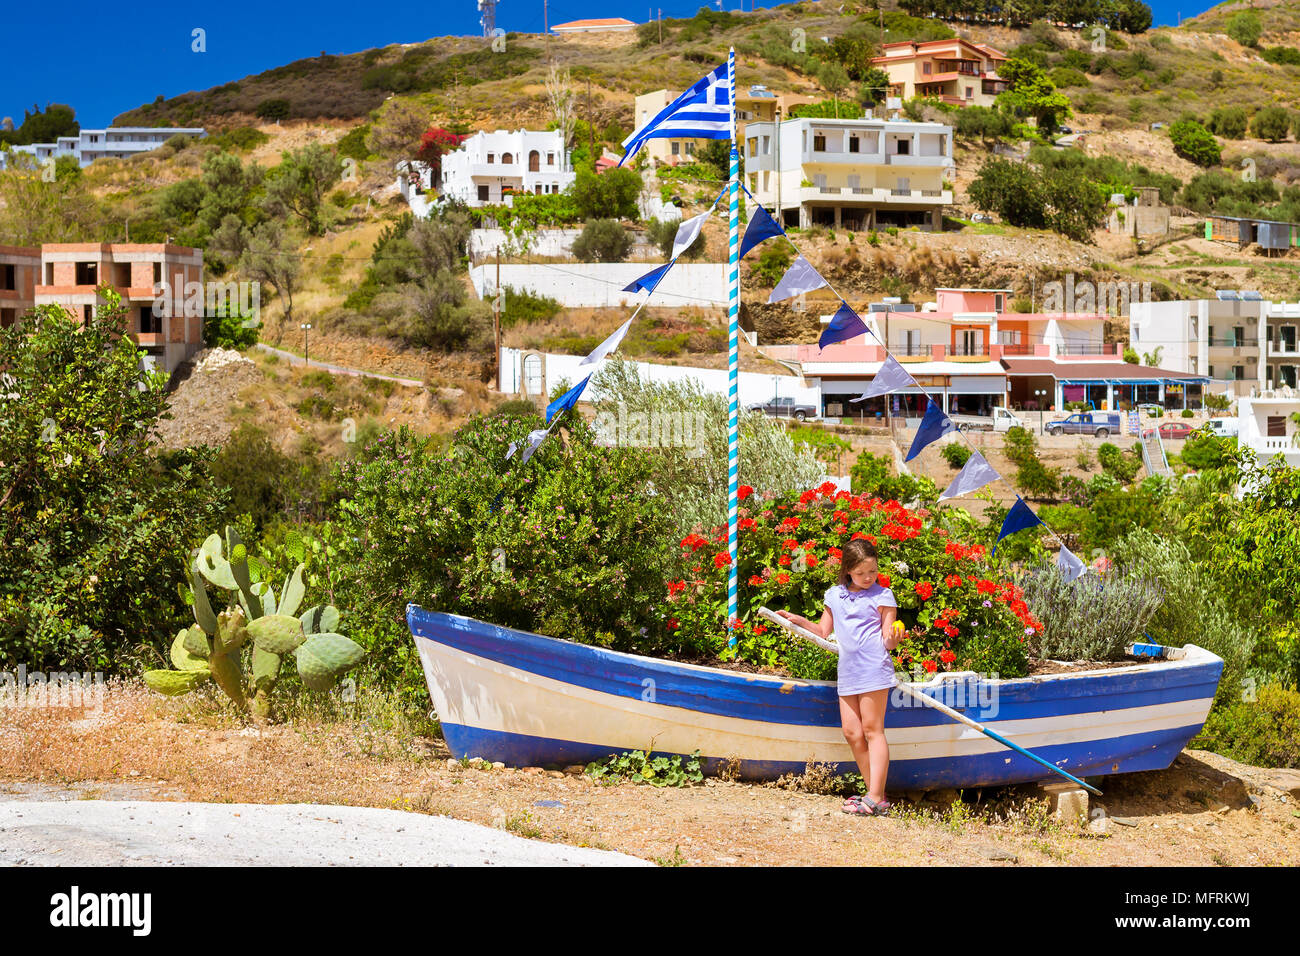 Girl with yellow lemon in hand posing against old fishing boat with Greek flag, stands on shore and decorated by flower bed. Tourist attraction Varkot Stock Photo